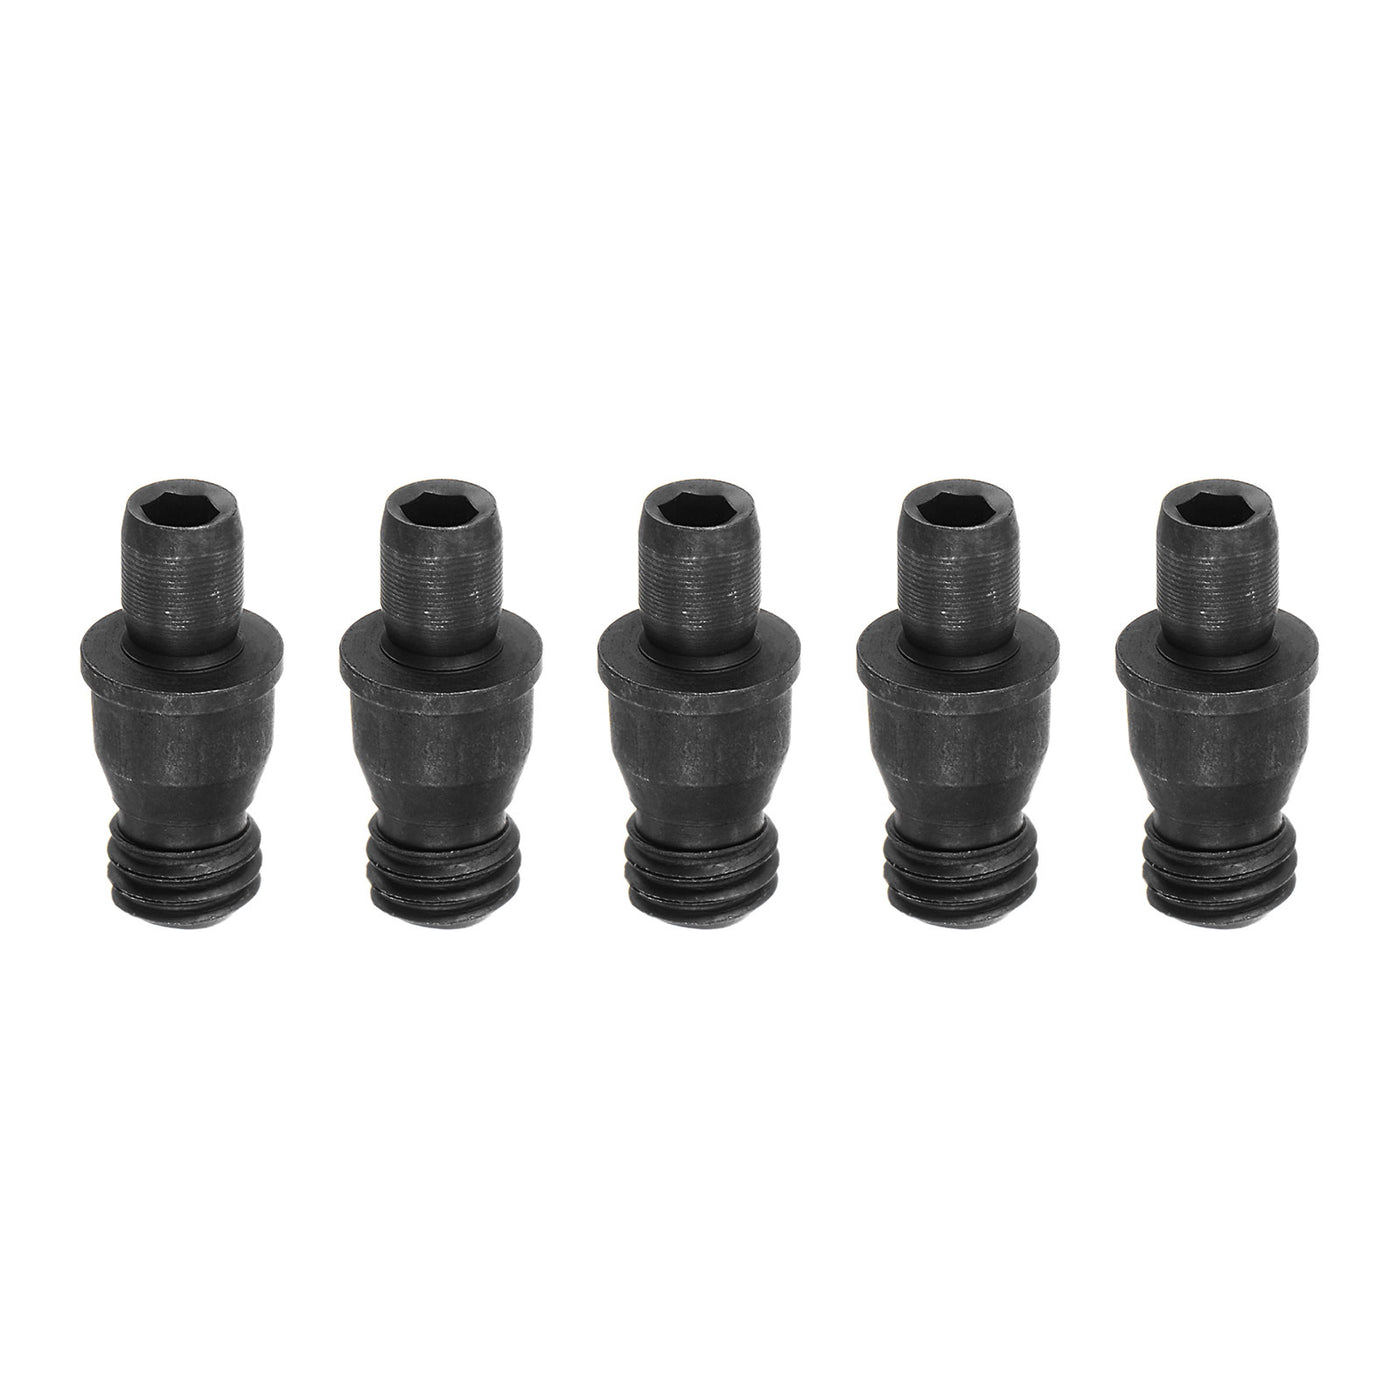 uxcell Uxcell M5x13-0.8 Set Screws for Carbide CNC Lathe Turning Tool Holder, 5Pcs